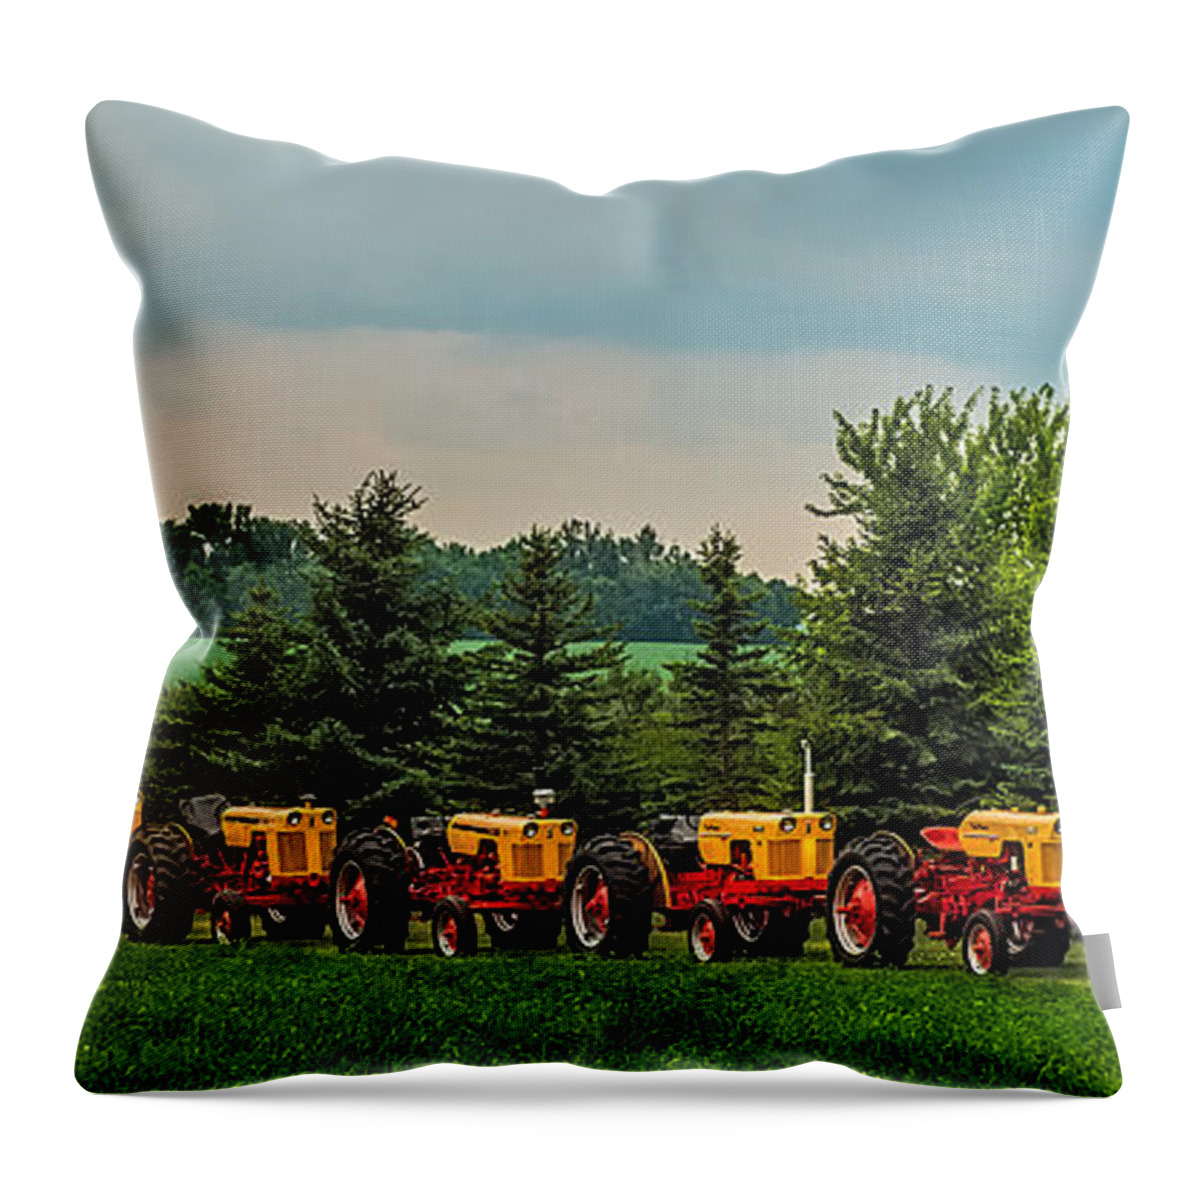 Case Throw Pillow featuring the photograph Case Train by Paul Freidlund